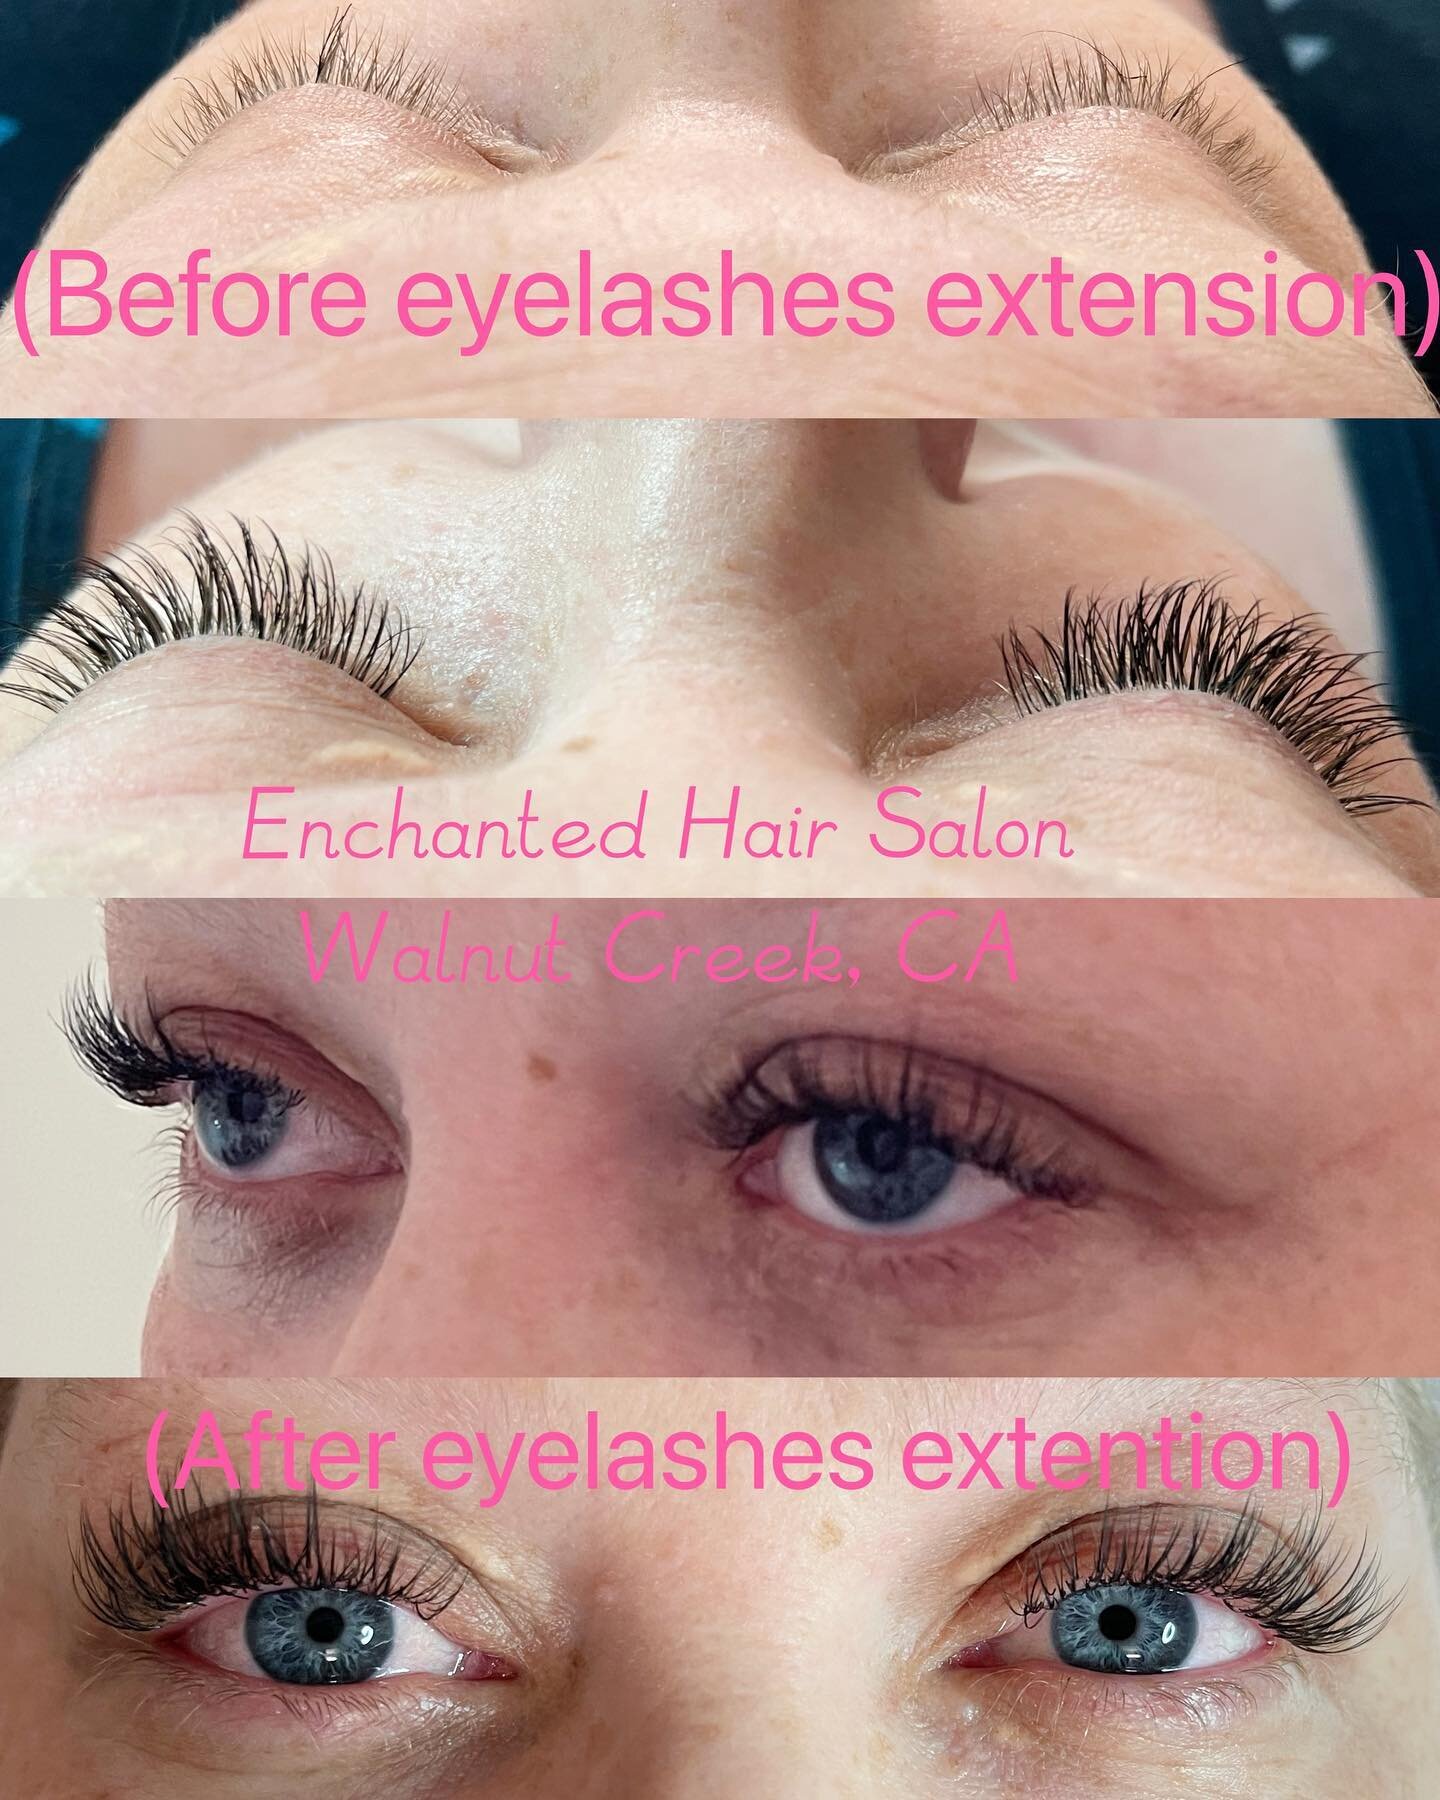 Eyelashes extensions. Ready for the Holidays